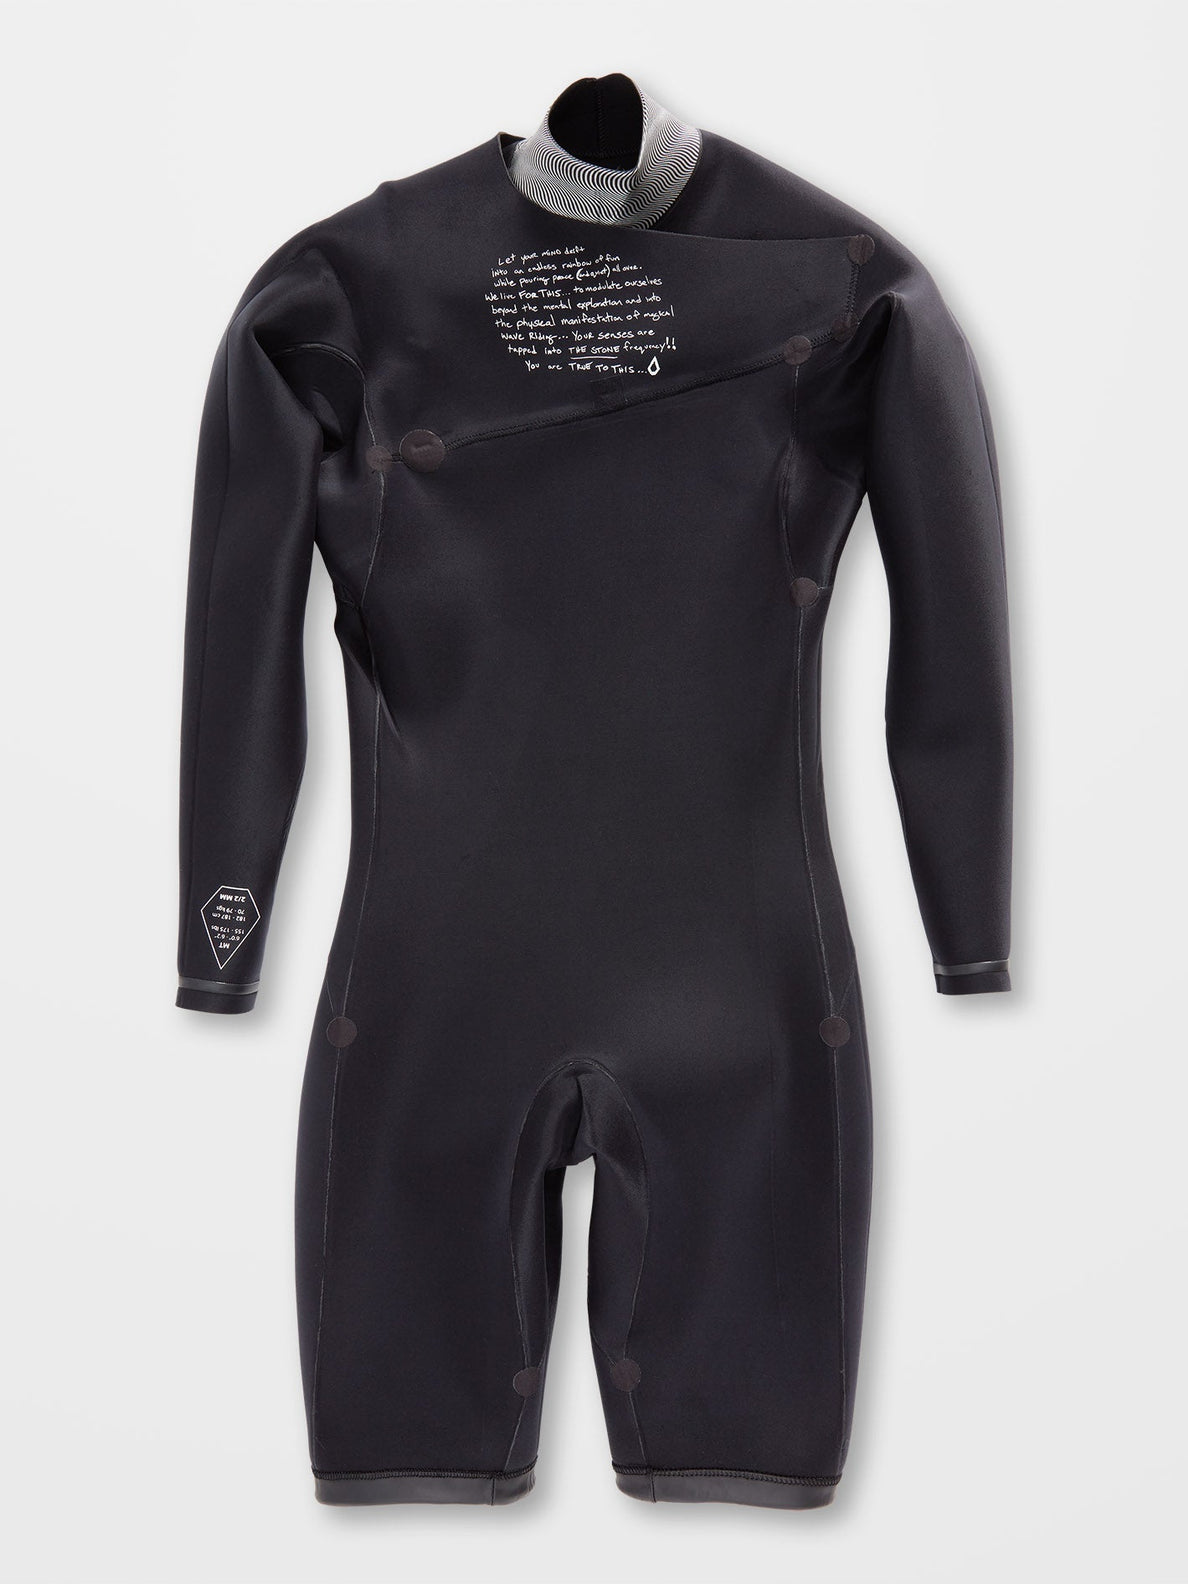 2/2Mm Long sleeve Spring Wetsuit - BLACK (A9532200_BLK) [9]